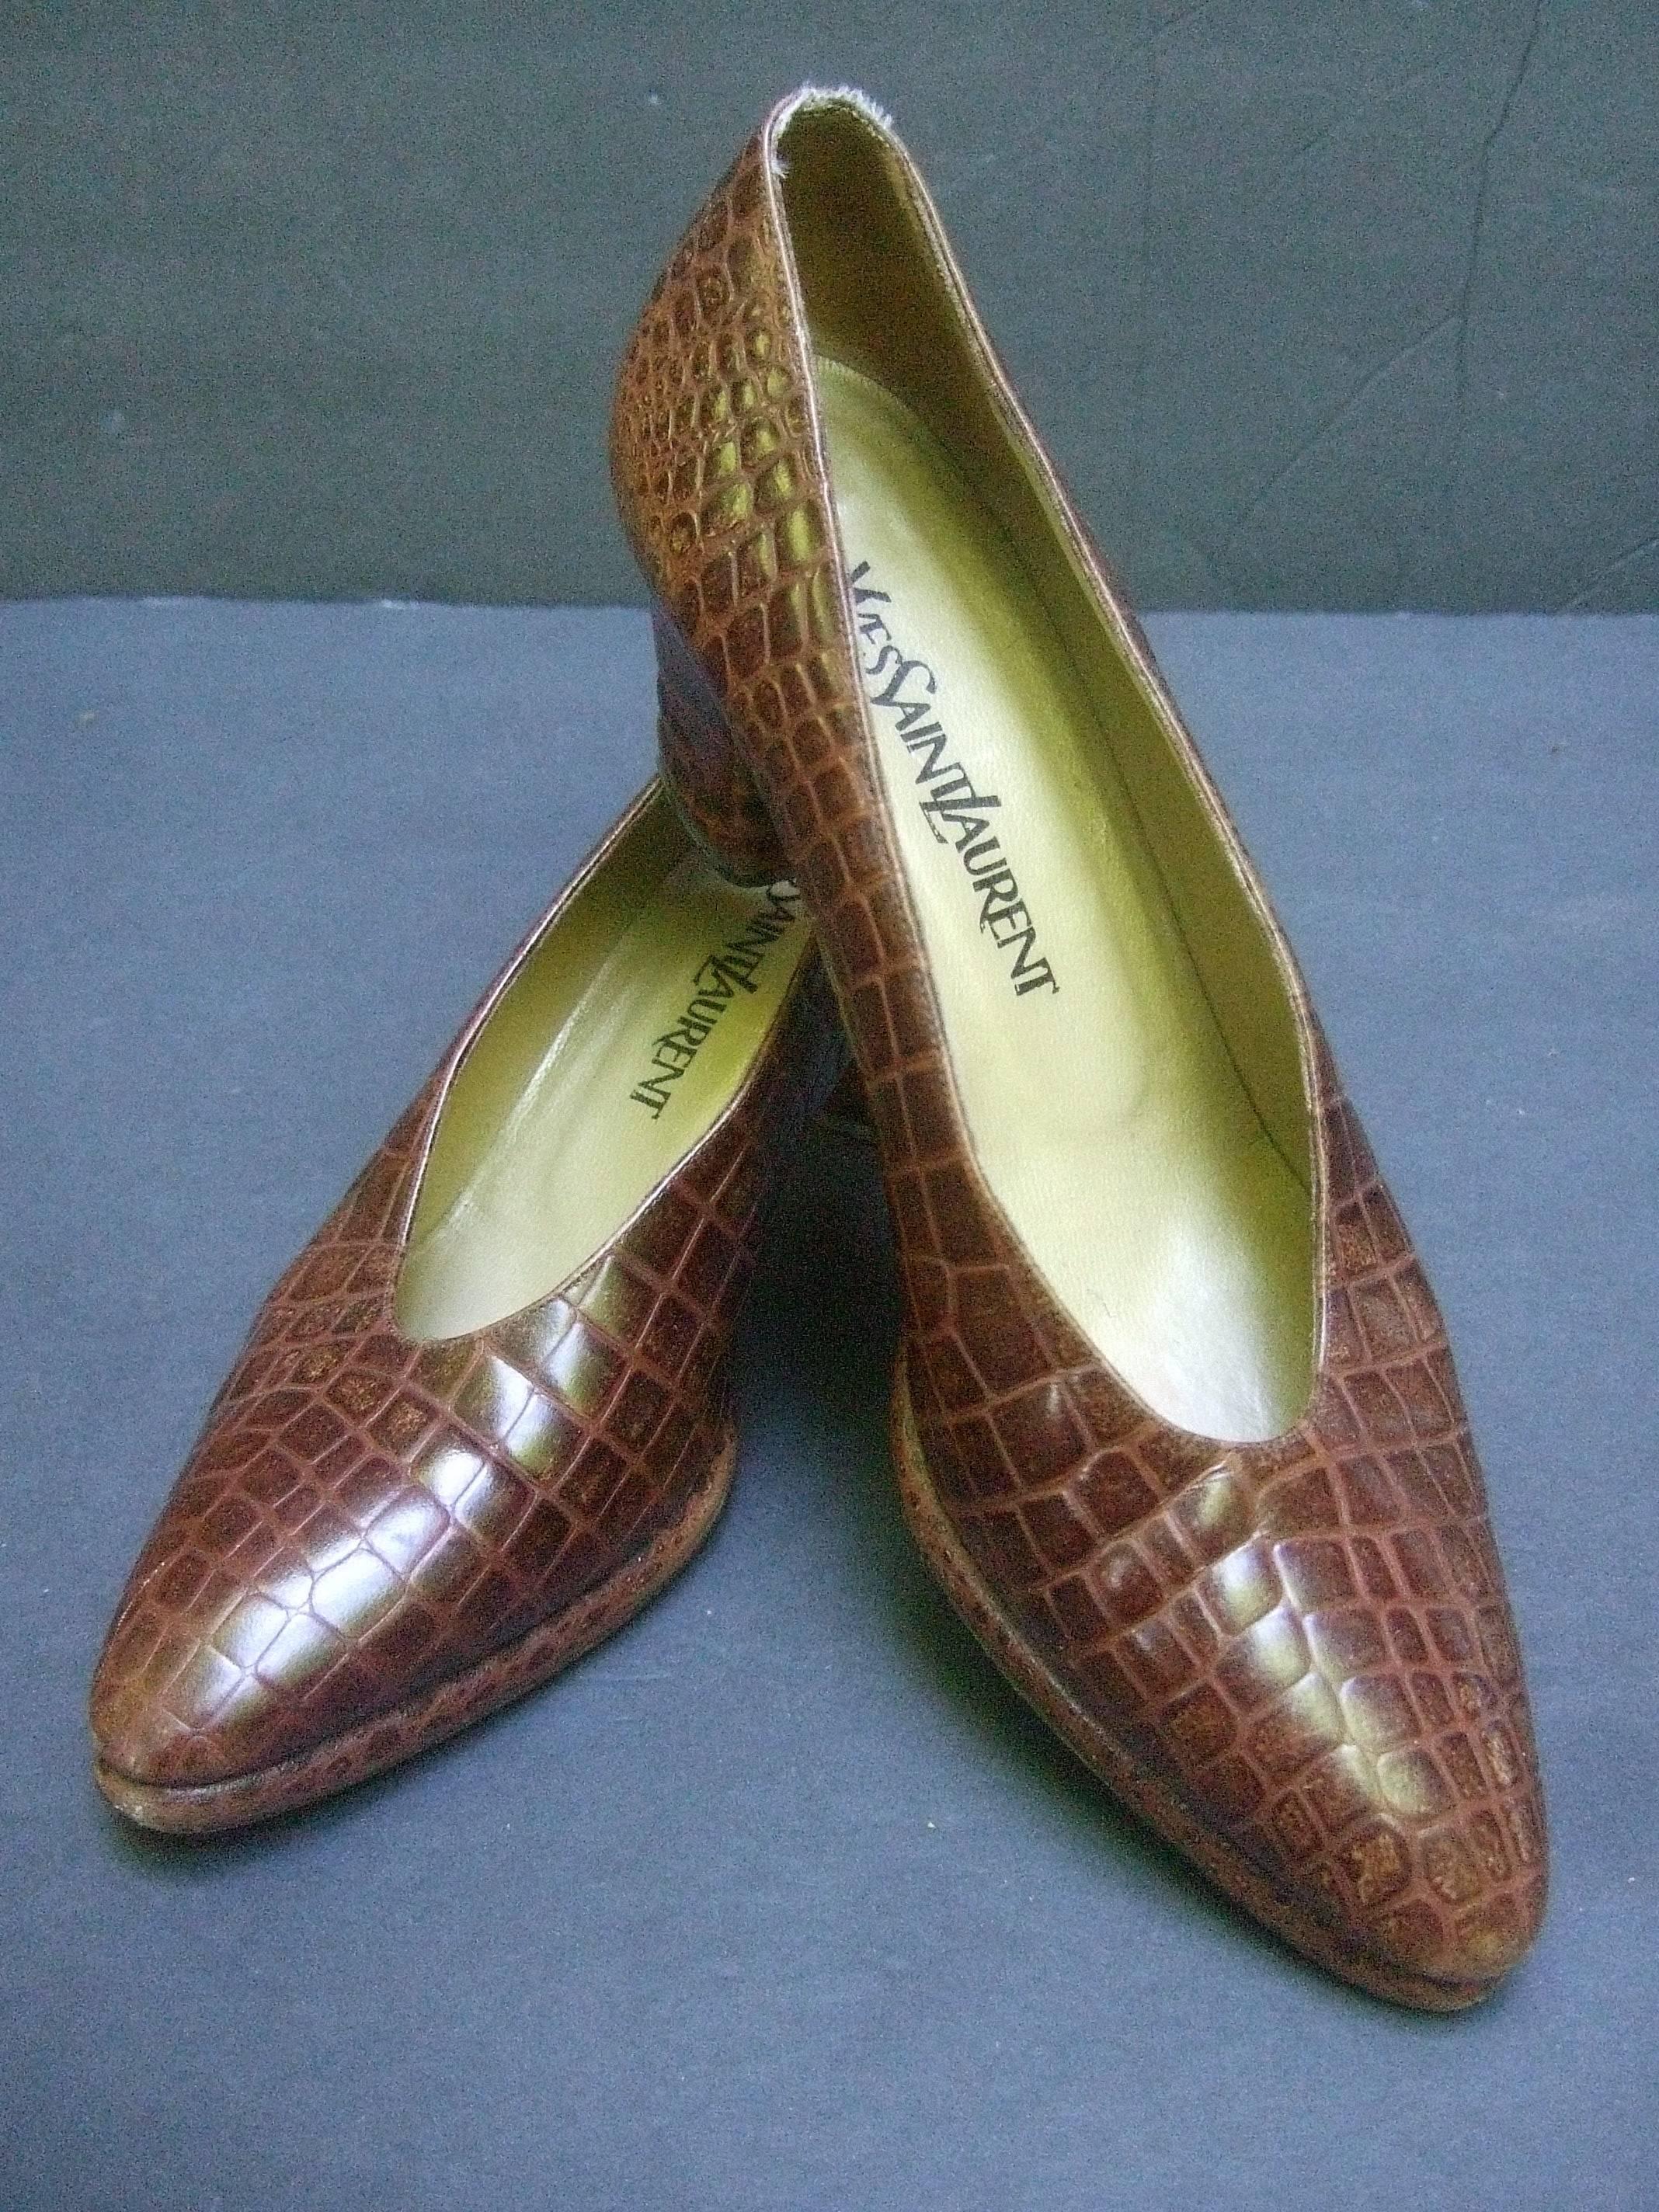 Yves Saint Laurent Italian embossed brown leather pumps US Size 7.5 M
The stylish Italian shoes have an embossed finish that emulates
reptile skin

The interior is lined in bronze color leather
The vintage 1990s era shoes make a classic